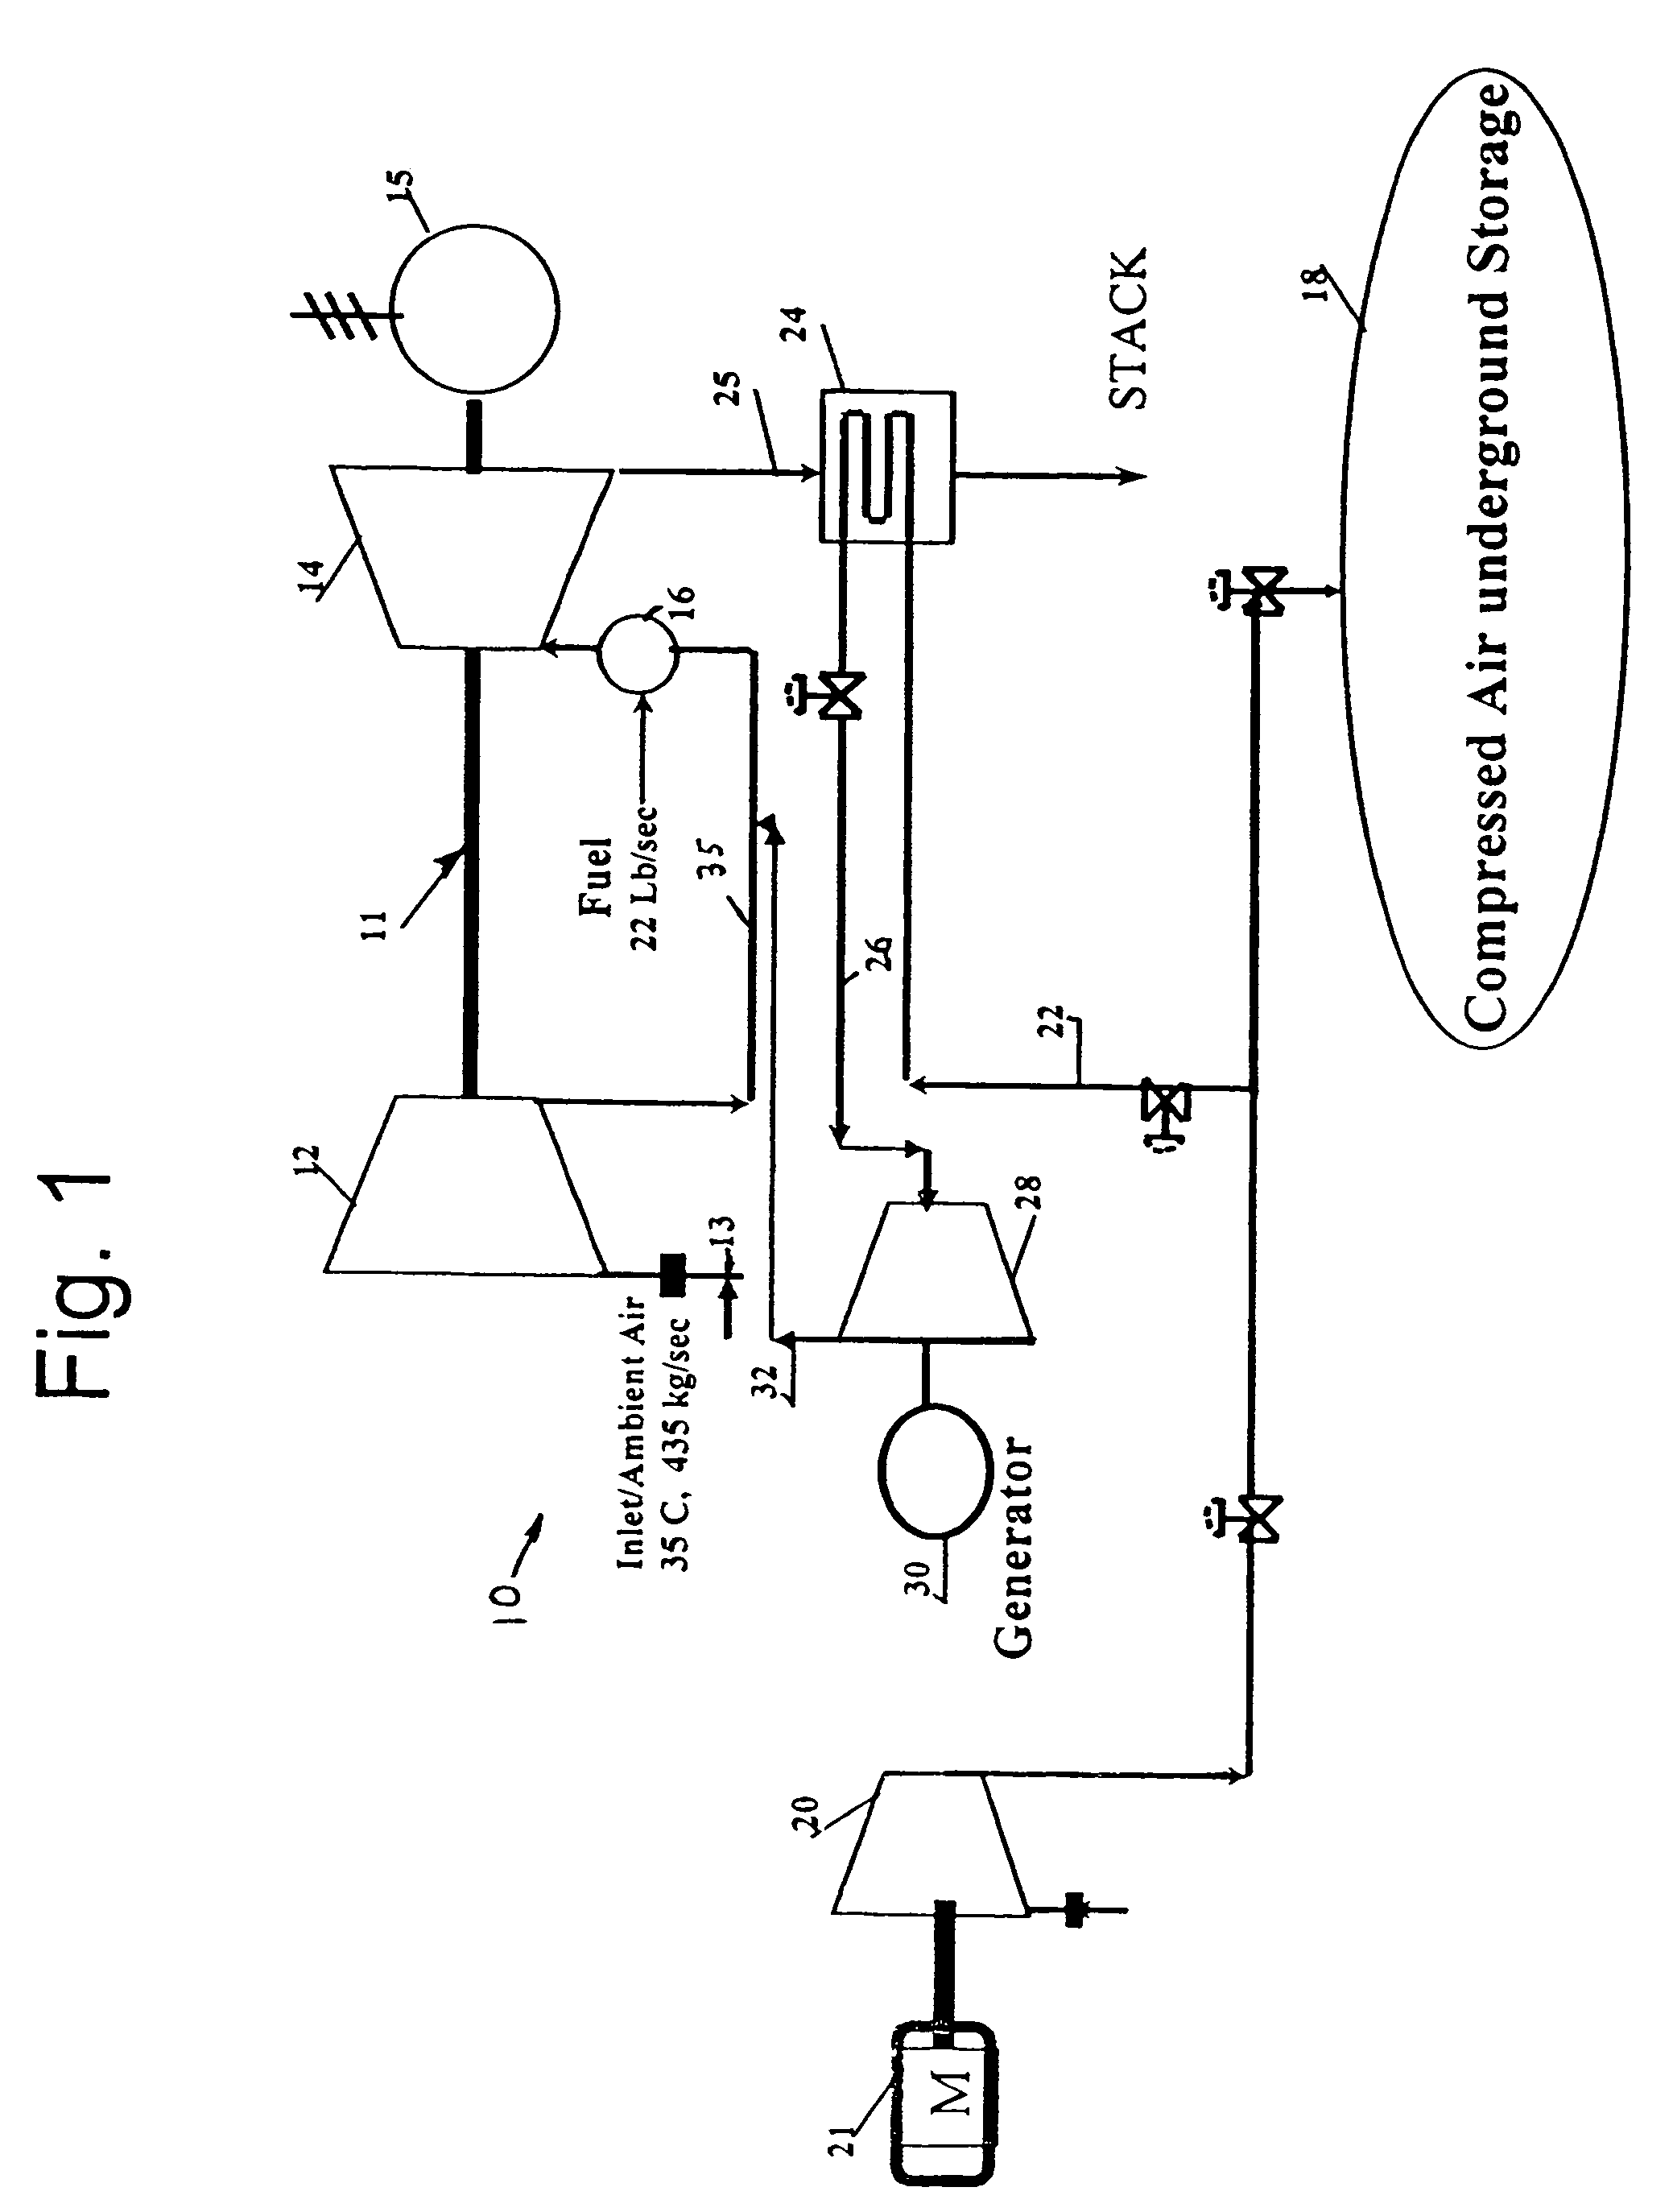 Power augmentation of combustion turbines with compressed air energy storage and additional expander with airflow extraction and injection thereof upstream of combustors